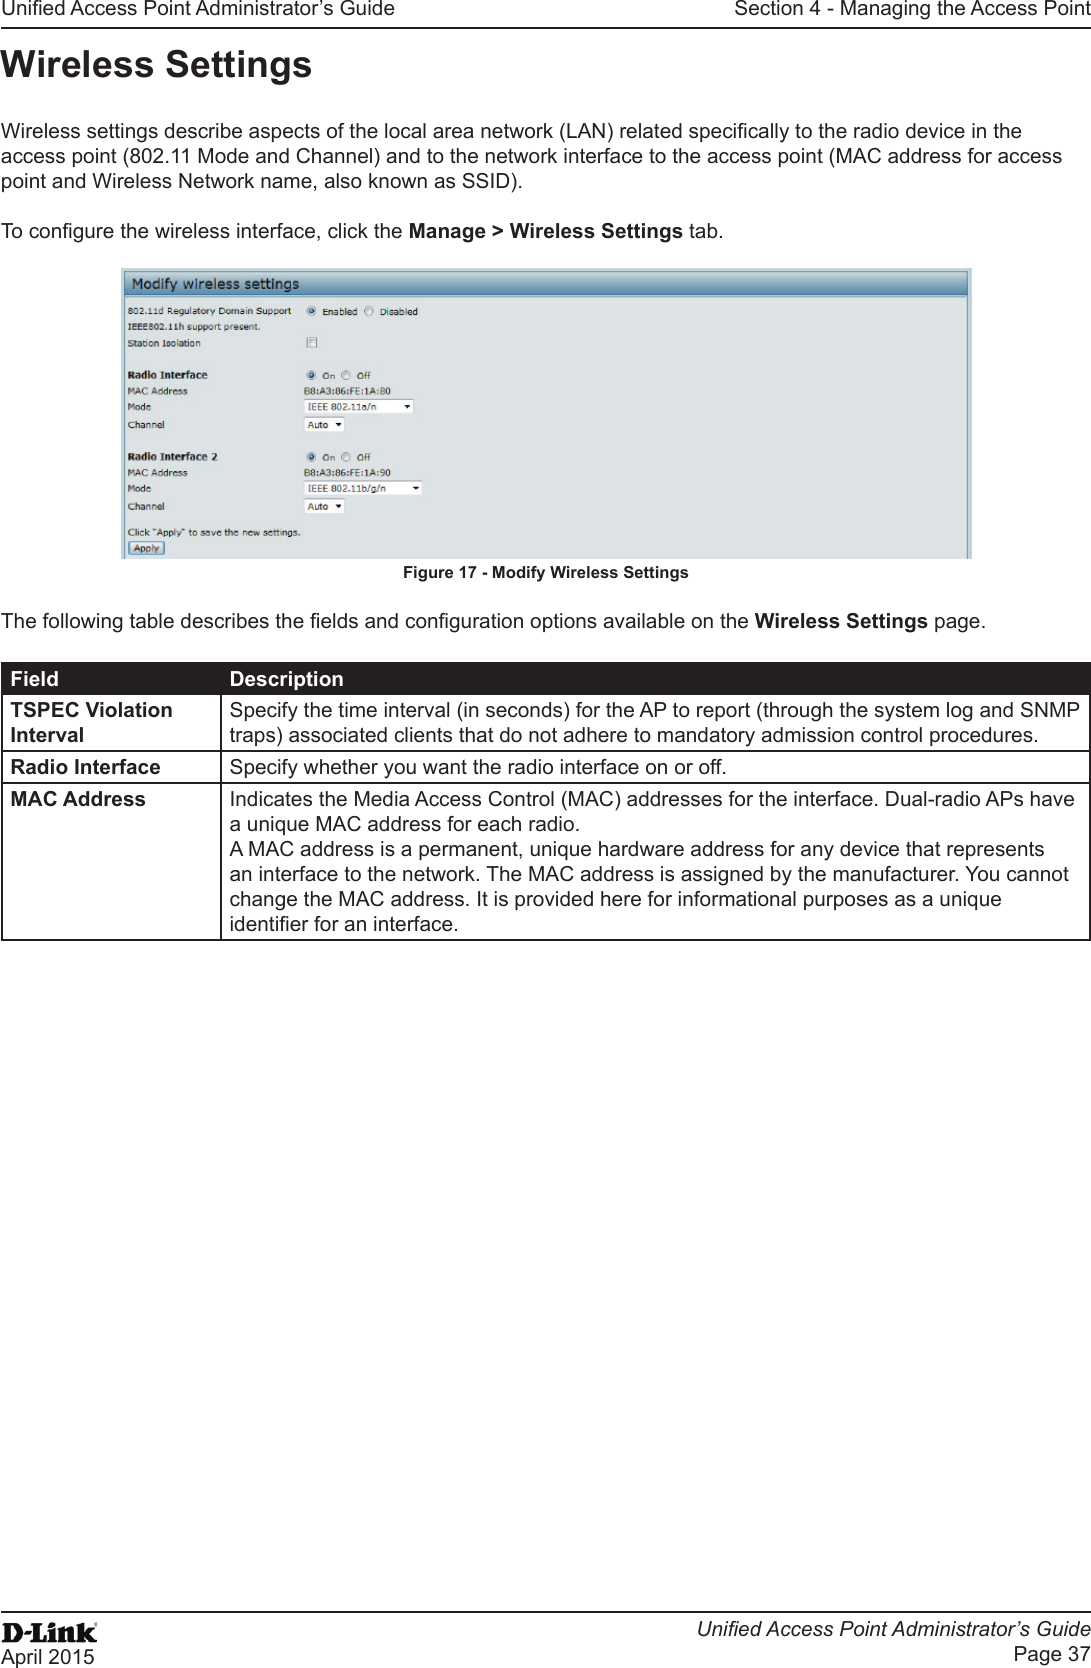 Unied Access Point Administrator’s GuideUnied Access Point Administrator’s GuidePage 37April 2015Section 4 - Managing the Access PointWireless SettingsWireless settings describe aspects of the local area network (LAN) related specically to the radio device in the access point (802.11 Mode and Channel) and to the network interface to the access point (MAC address for access point and Wireless Network name, also known as SSID). To congure the wireless interface, click the Manage &gt; Wireless Settings tab.Figure 17 - Modify Wireless SettingsThe following table describes the elds and conguration options available on the Wireless Settings page.Field DescriptionTSPEC Violation IntervalSpecify the time interval (in seconds) for the AP to report (through the system log and SNMP traps) associated clients that do not adhere to mandatory admission control procedures.Radio Interface Specify whether you want the radio interface on or off.MAC Address Indicates the Media Access Control (MAC) addresses for the interface. Dual-radio APs have a unique MAC address for each radio.A MAC address is a permanent, unique hardware address for any device that represents an interface to the network. The MAC address is assigned by the manufacturer. You cannot change the MAC address. It is provided here for informational purposes as a unique identier for an interface.